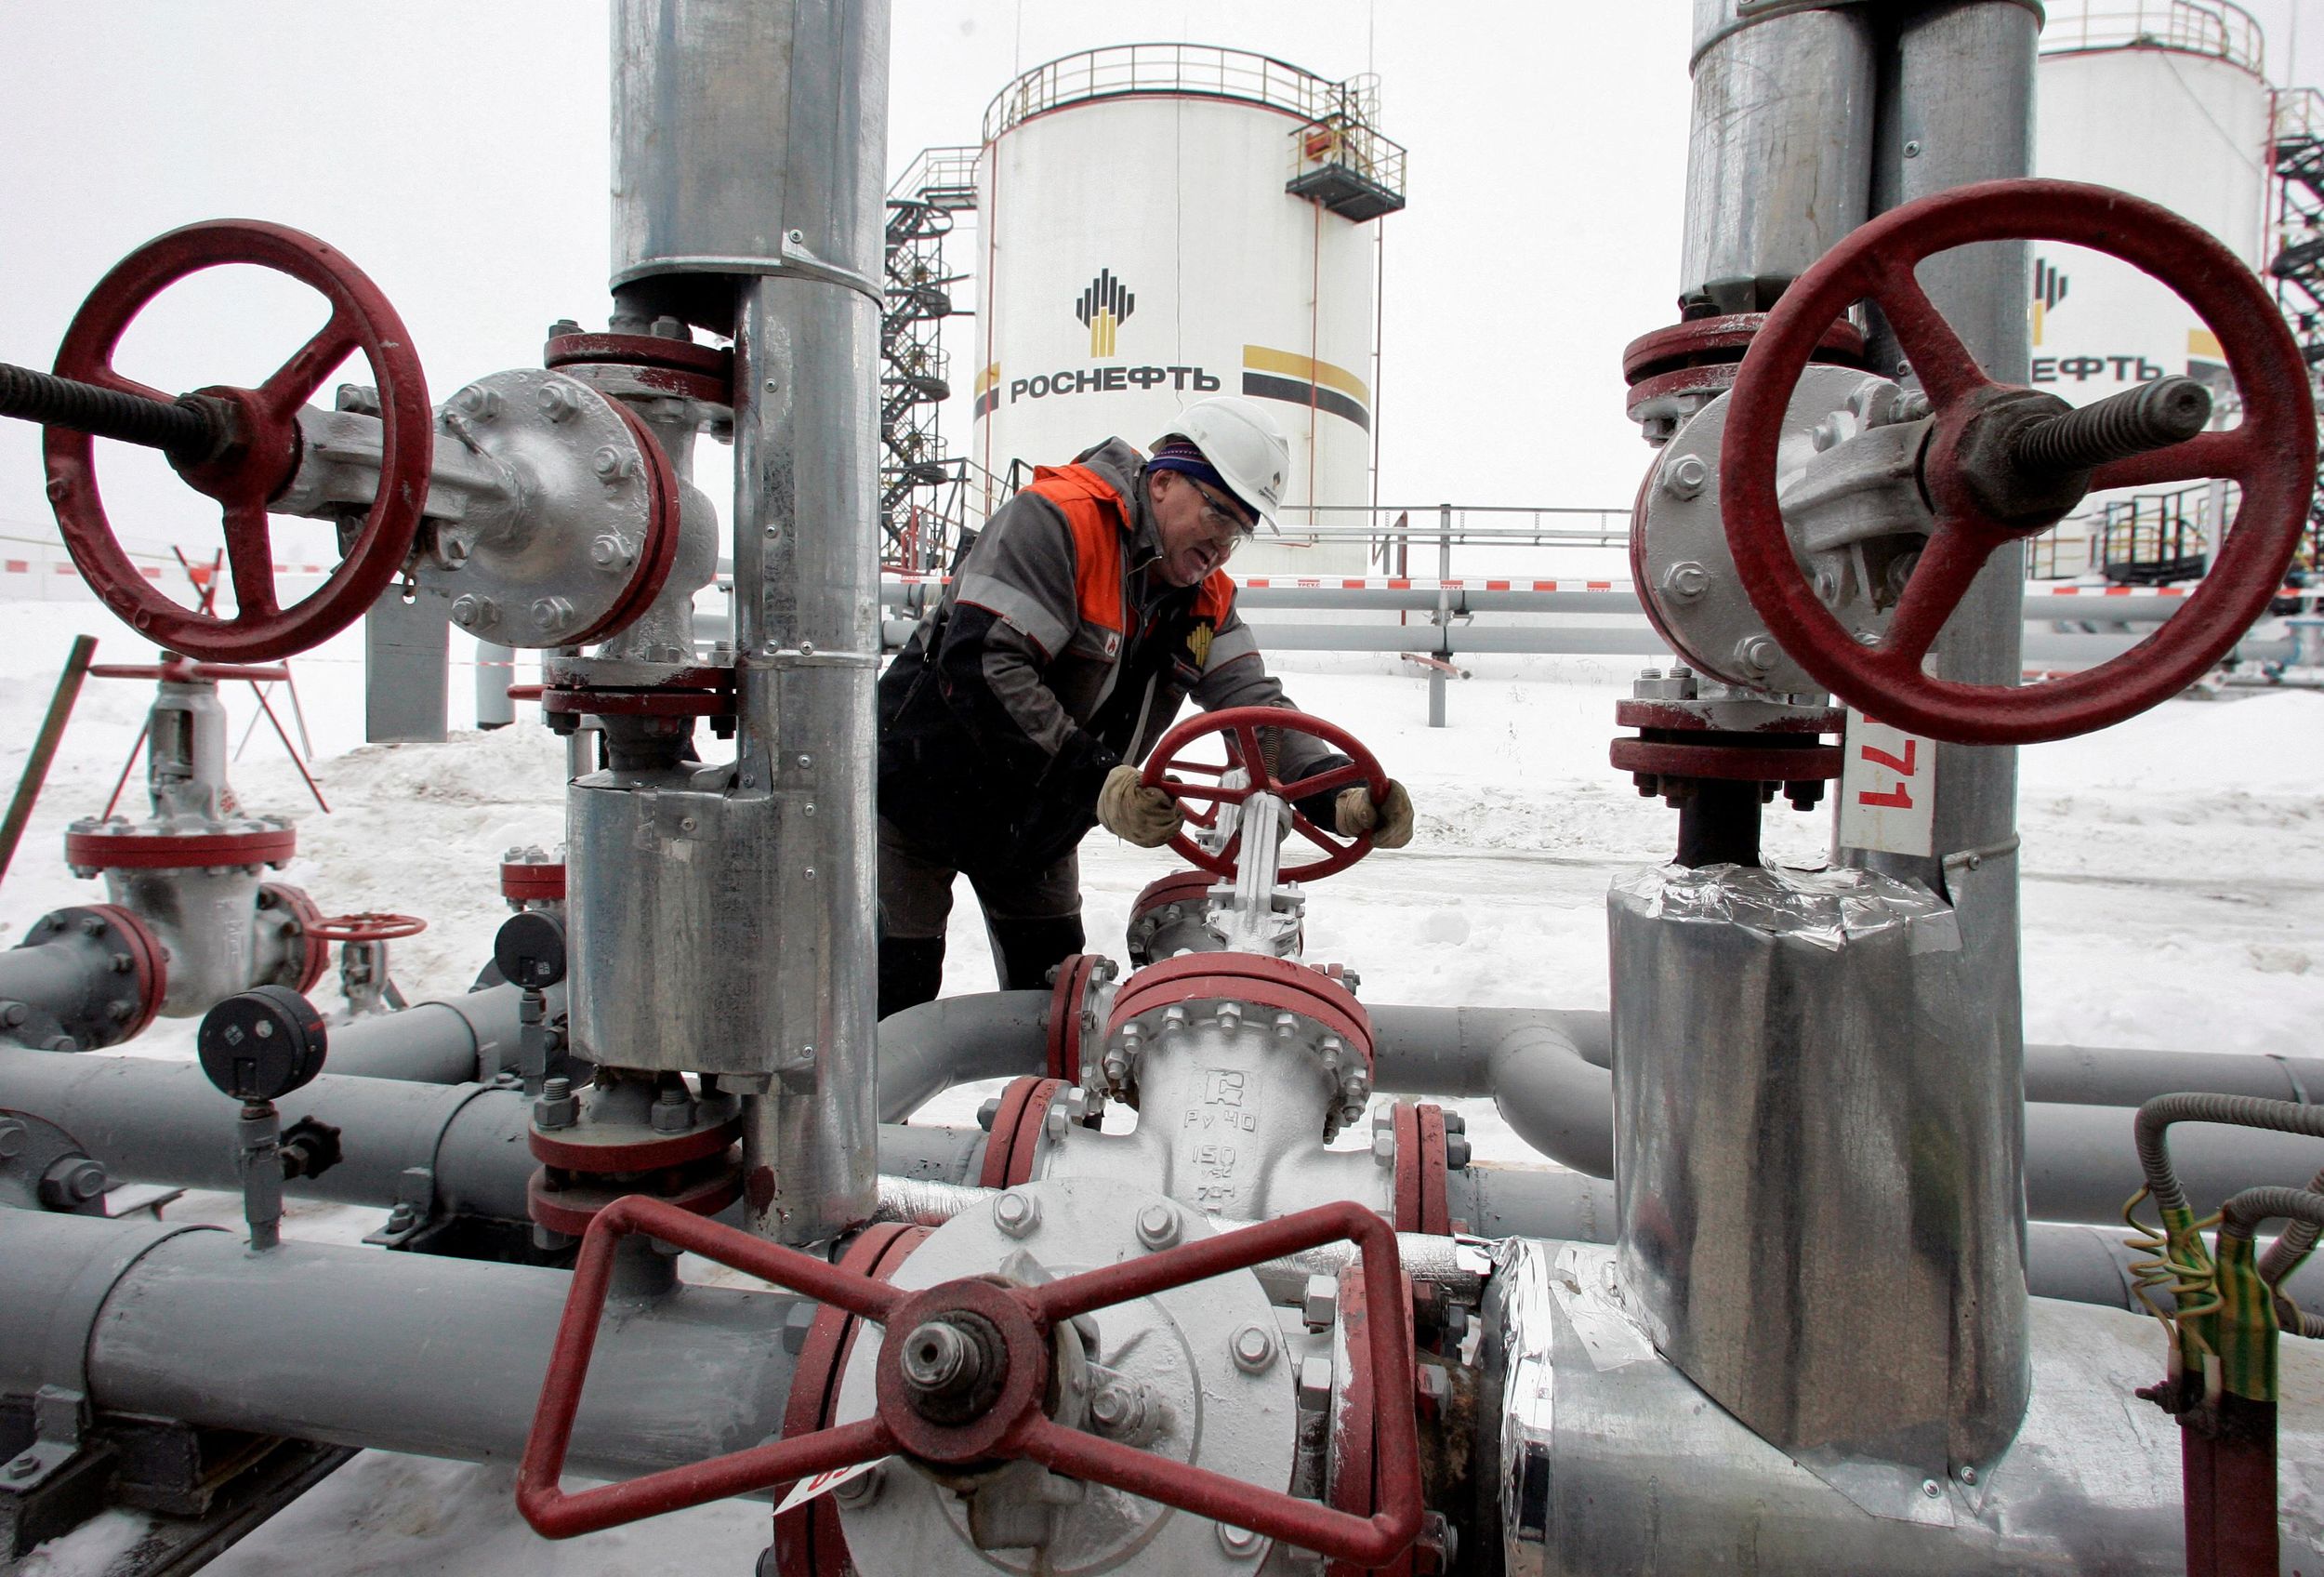 The worst may be still to come in the Russia-Ukraine energy crisis